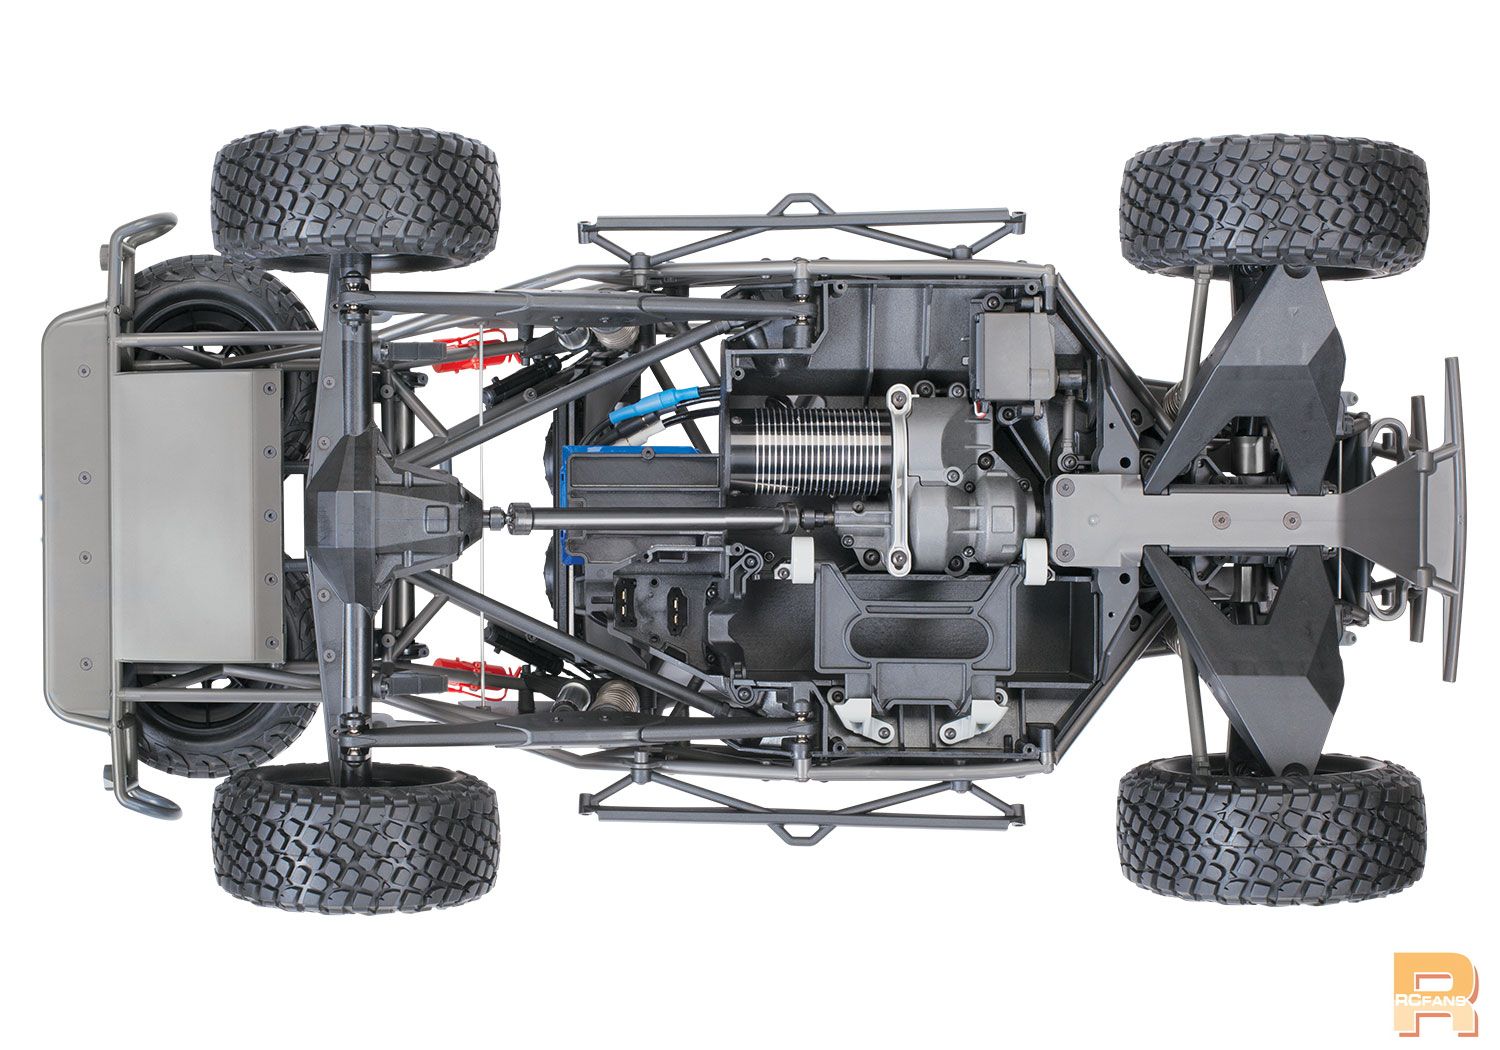 chassis-bottom-plates-off.jpg